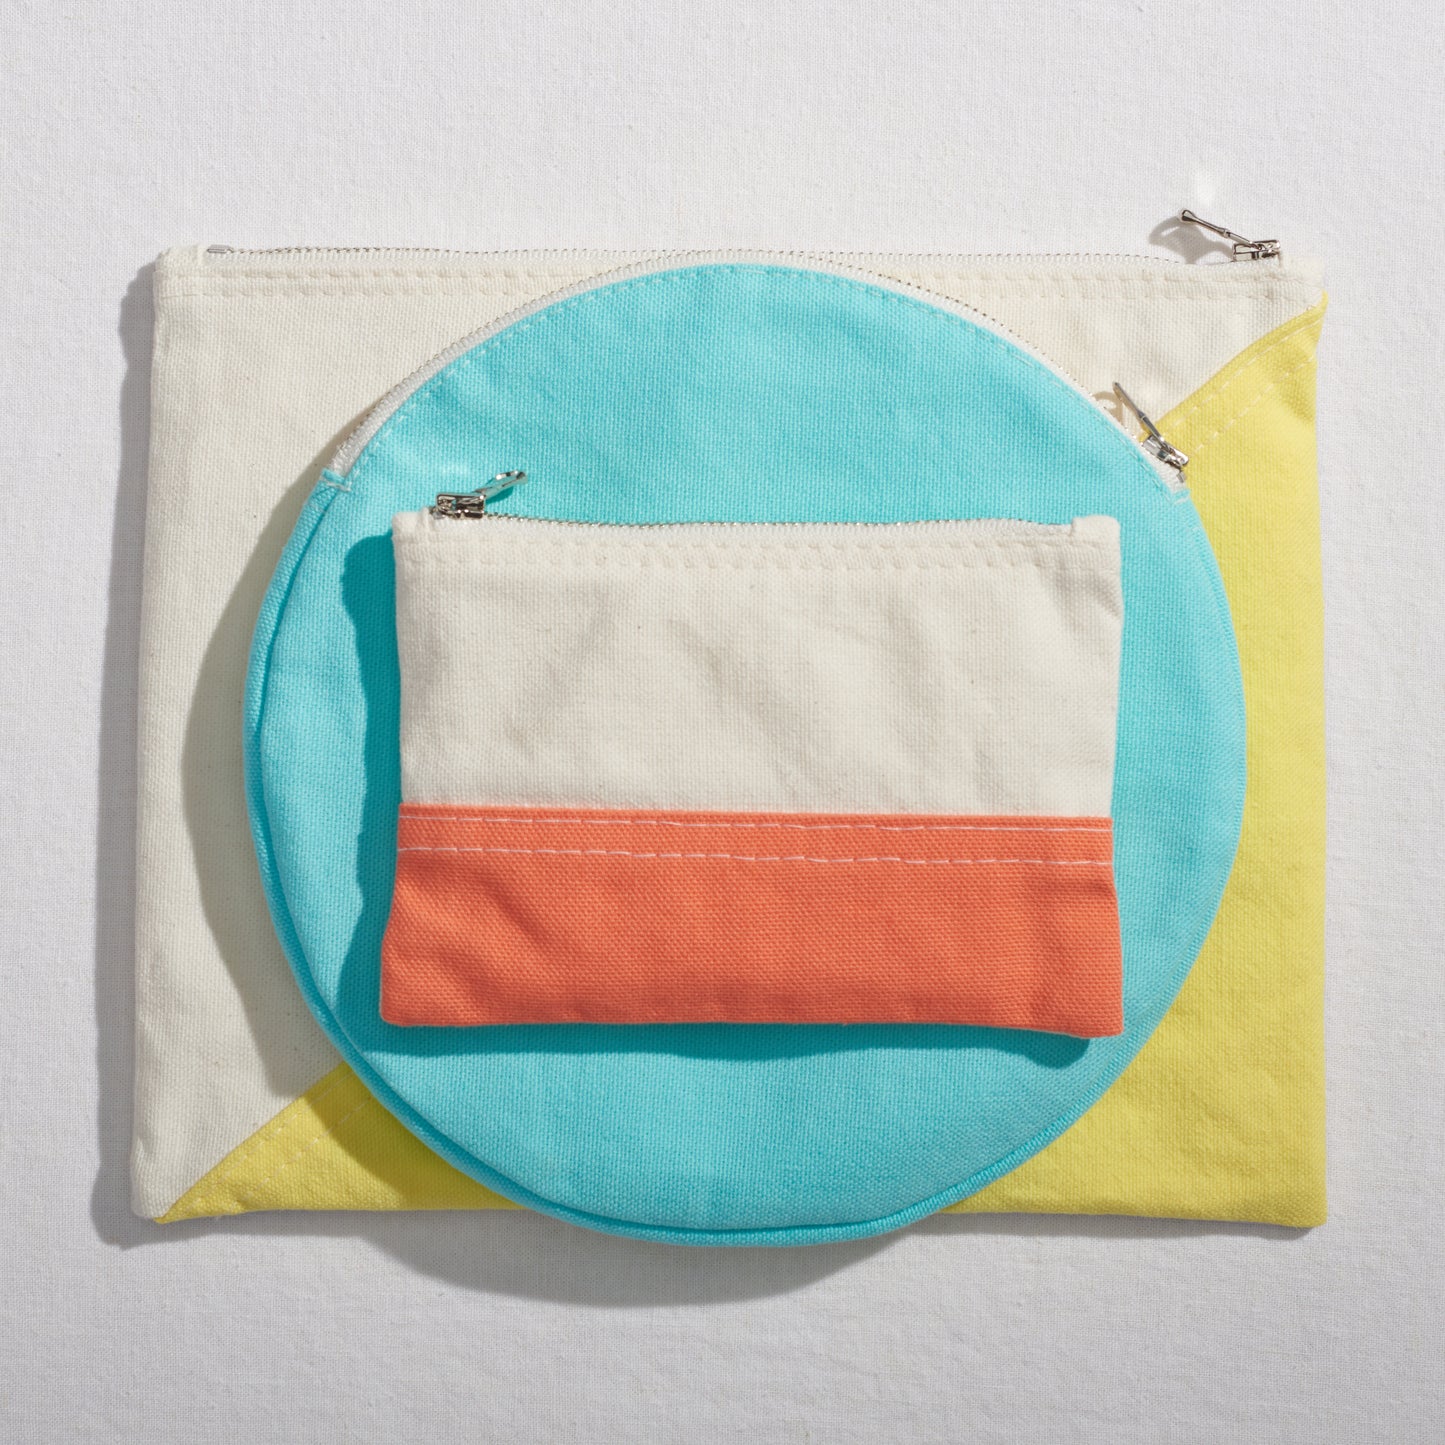 Re:Canvas "Threes" Pouch in Cloud